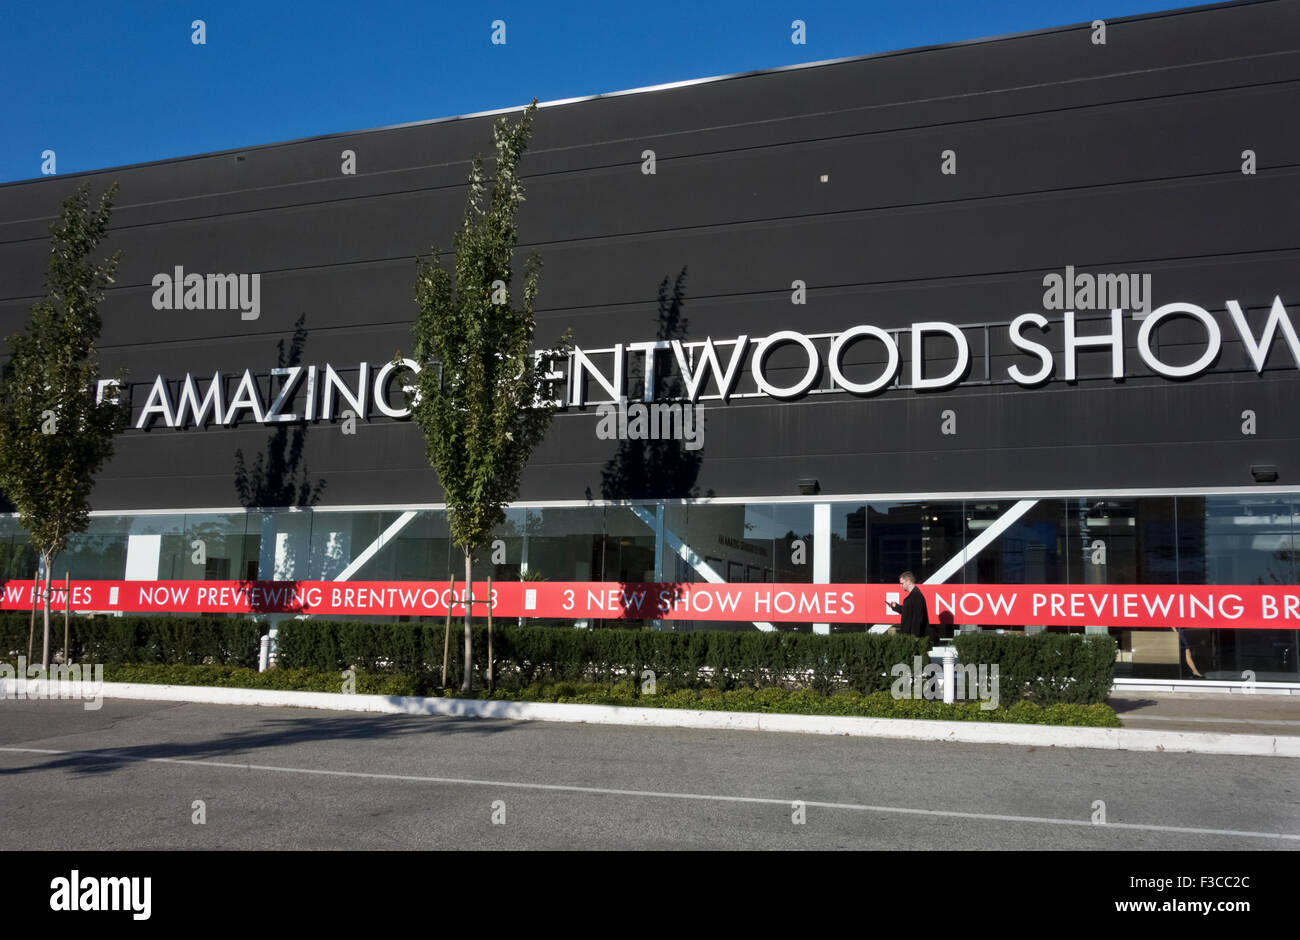 Exterior sign for the Amazing Brentwood condominium development show homes in Burnaby, BC (Greater Vancouver), Canada Stock Photo